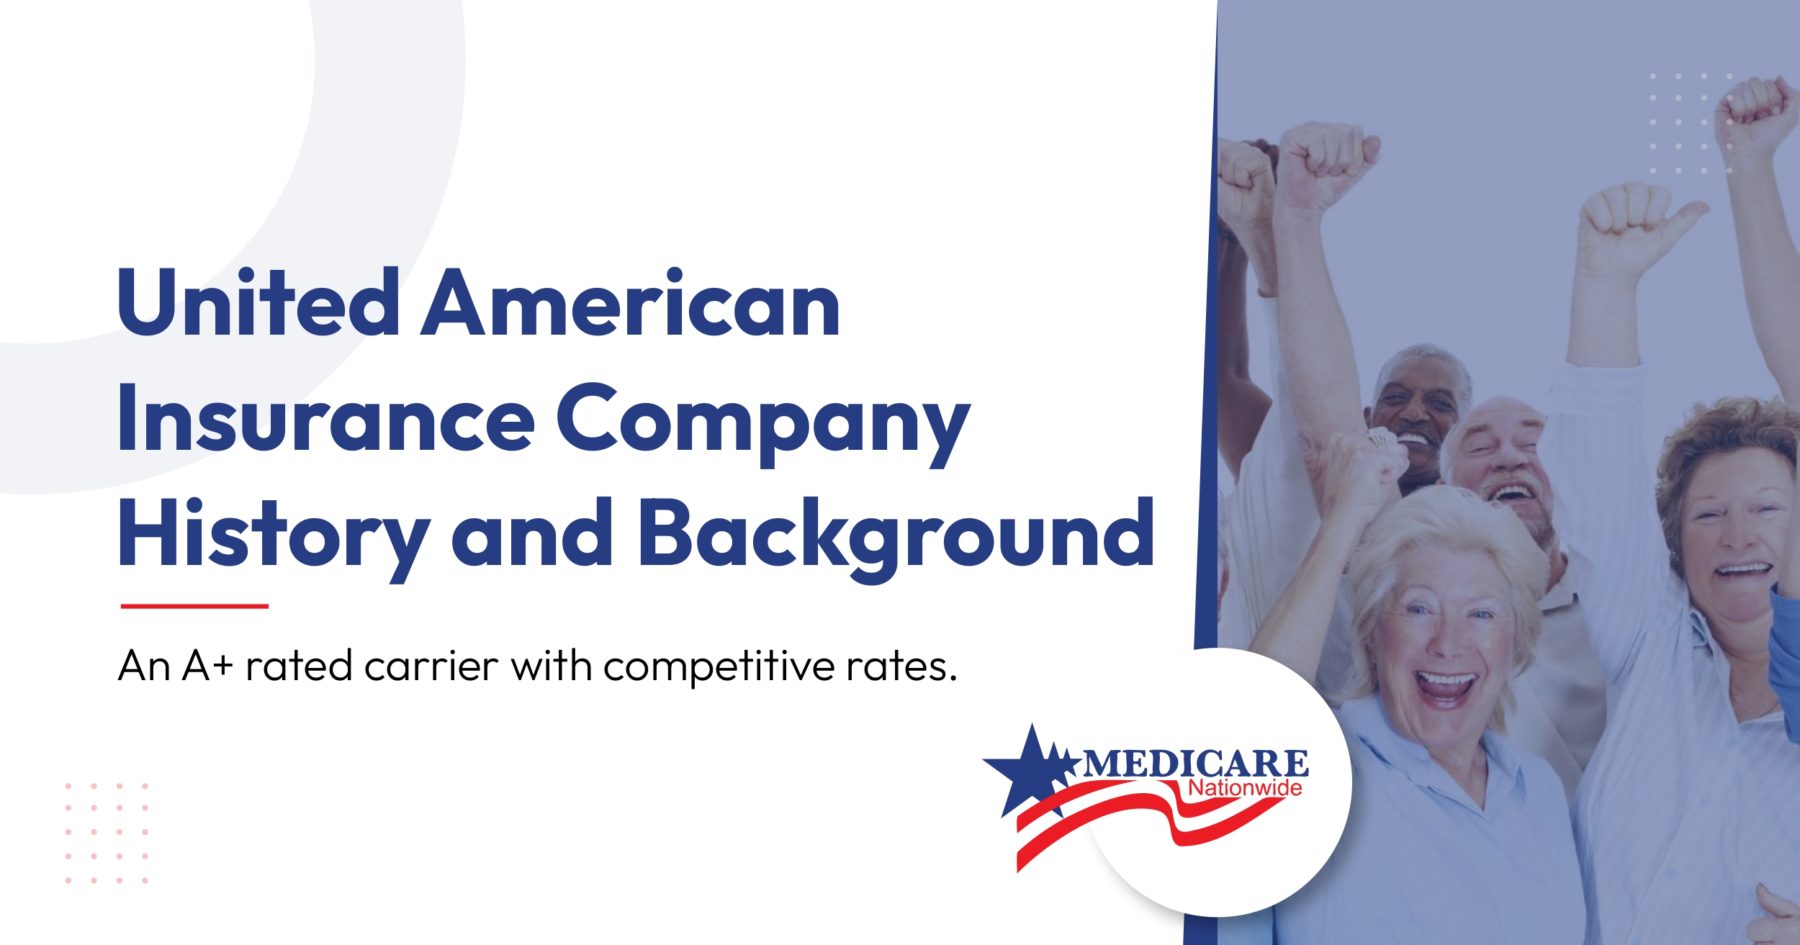 United American Insurance Company History and Background